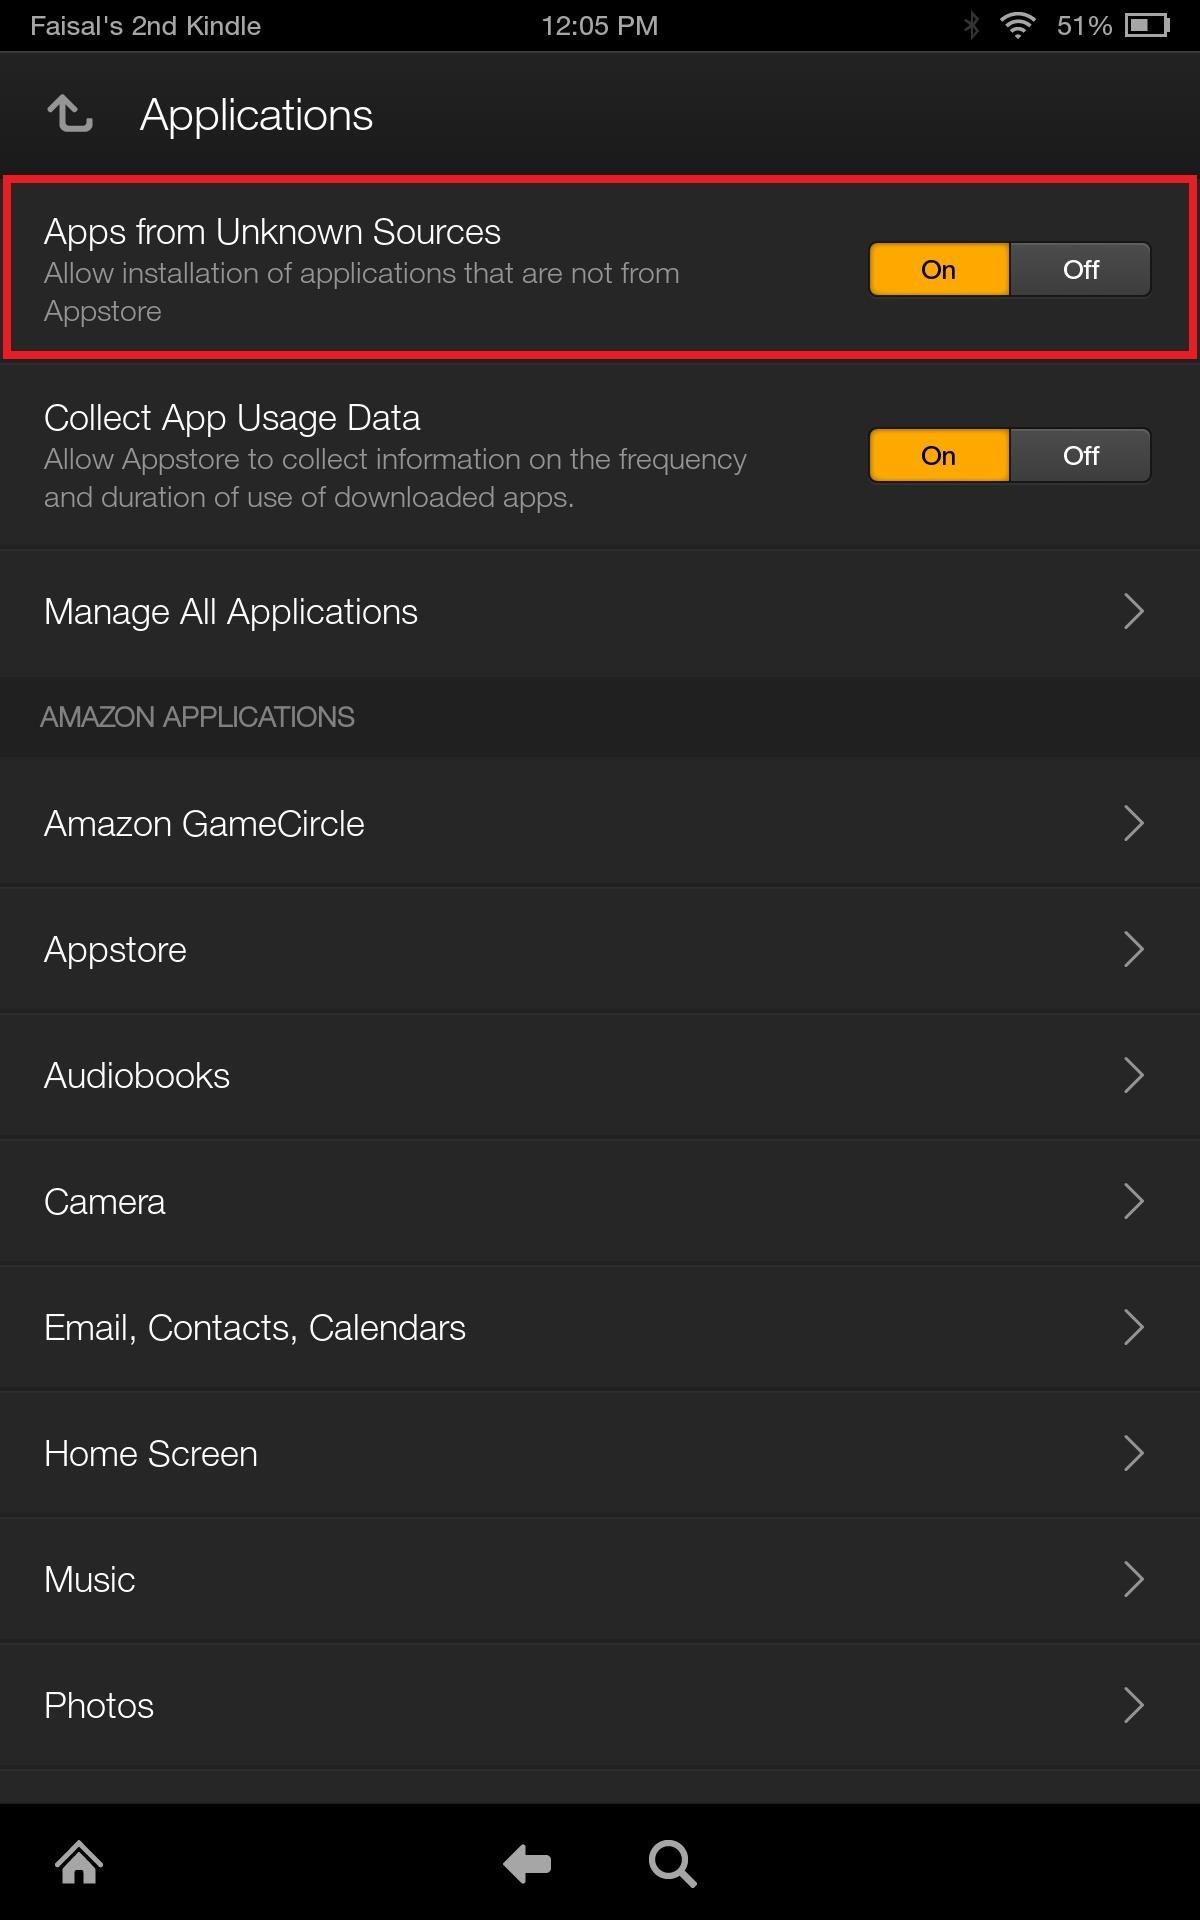 How to Install Almost Any Google Play or Third-Party App on Your Amazon Kindle Fire HDX